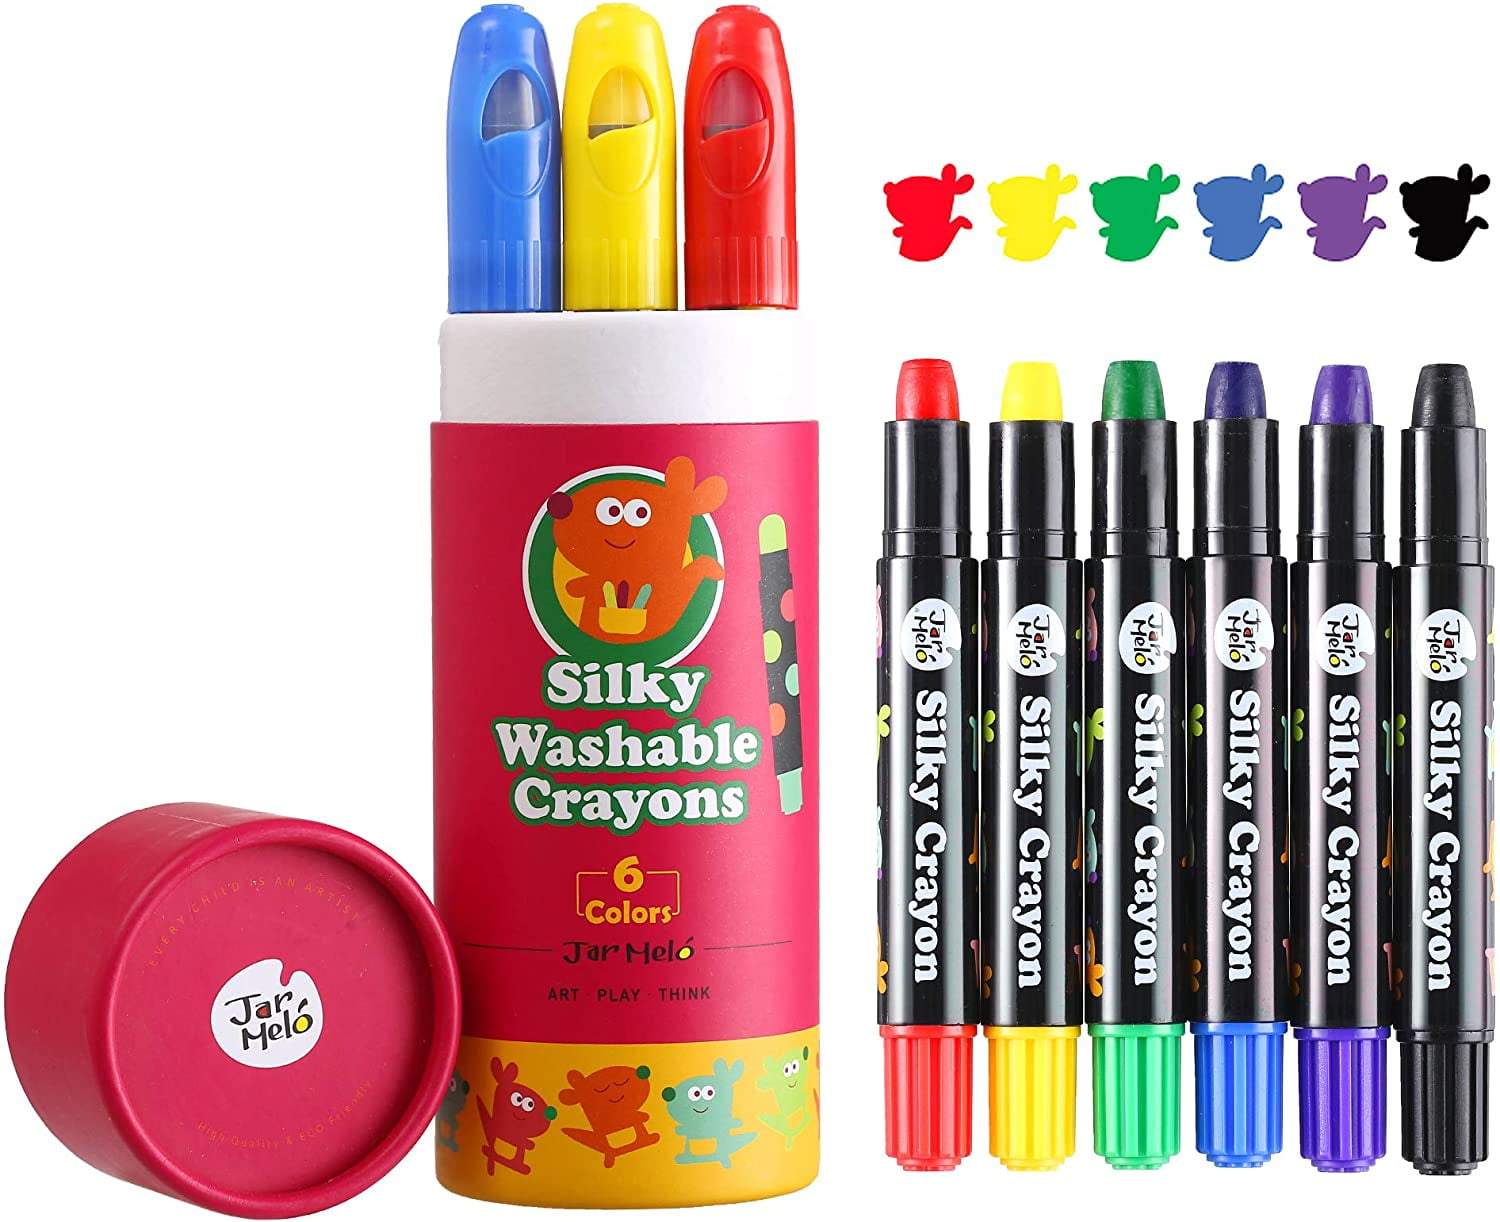 6 Colors Baby Roo JarMelo Silky Washable Crayon Kid's Toddler Art Non toxic 